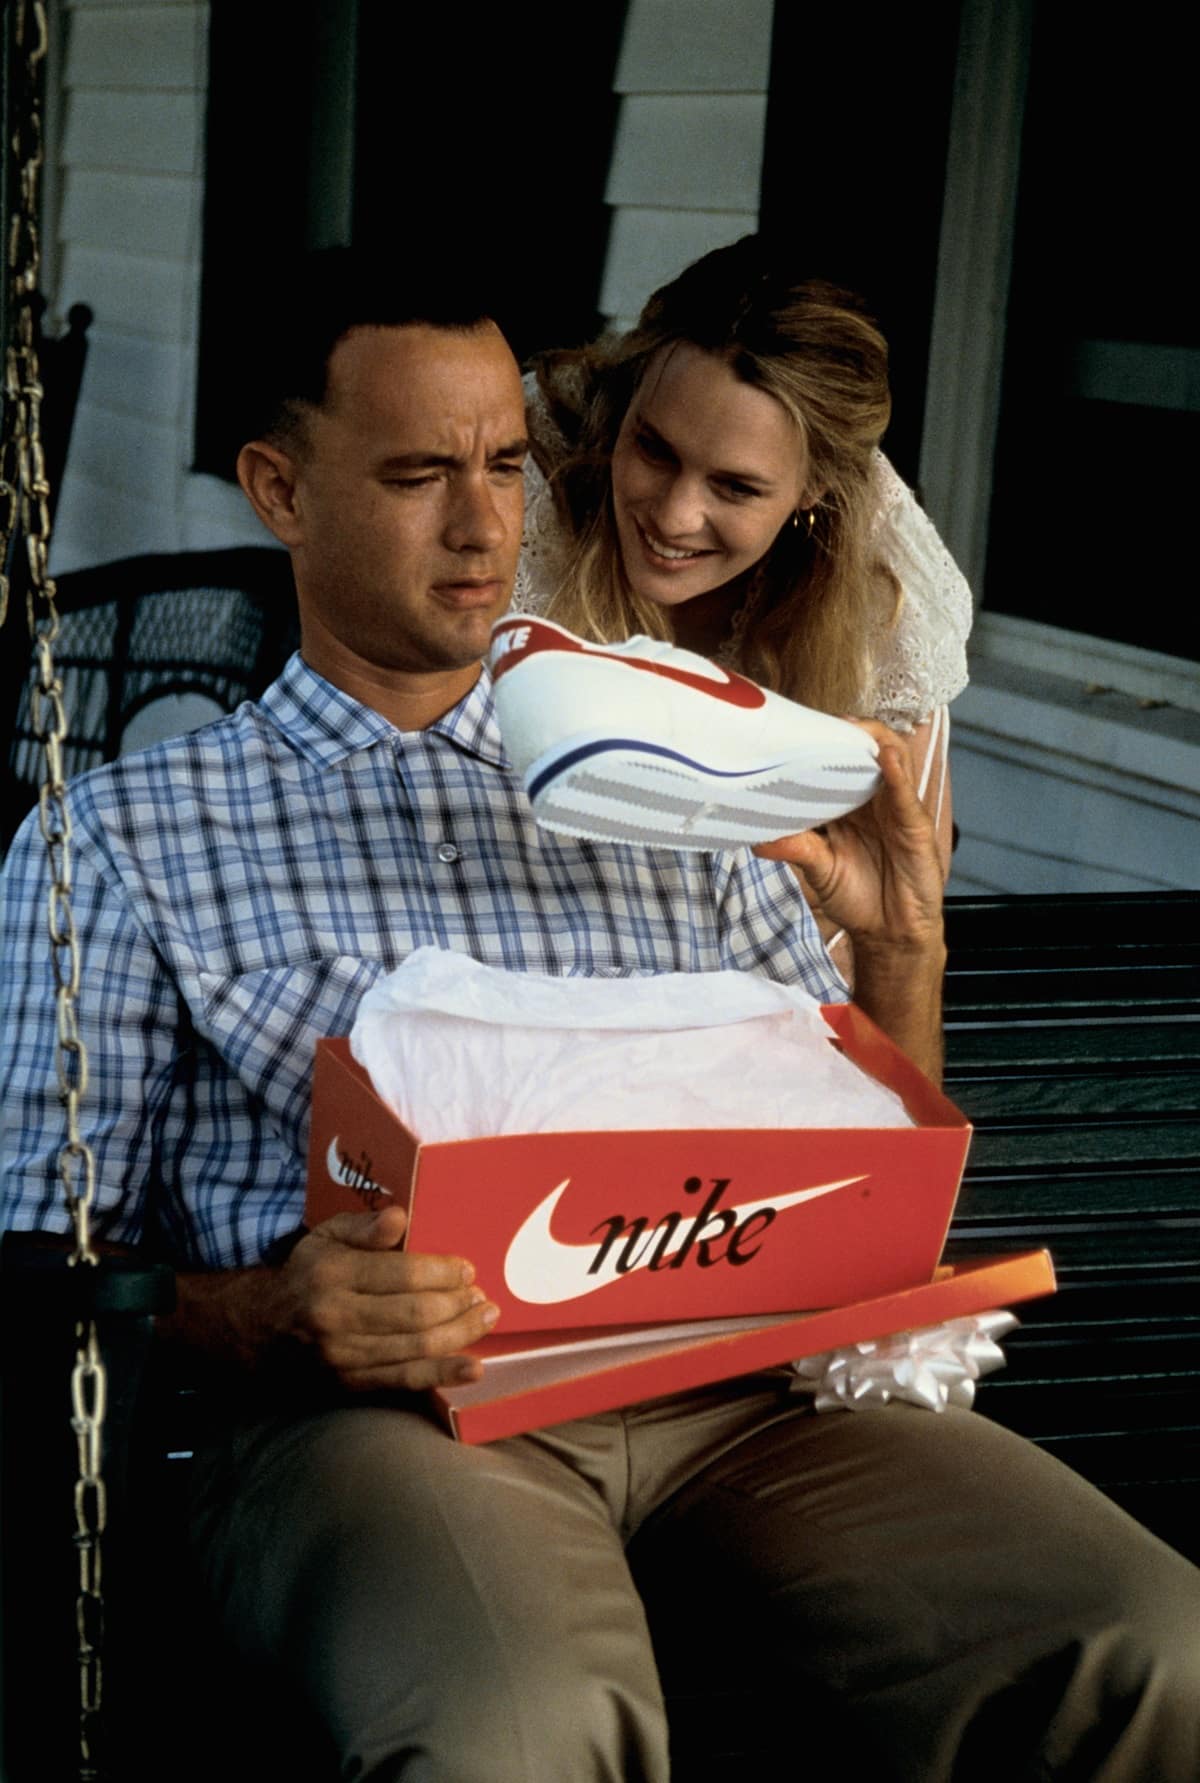 The Nike shoes in Forrest Gump symbolize Forrest's life journey, encompassing his friendship with Jenny, the lessons imparted by Lieutenant Dan, and the significance of leading a virtuous existence